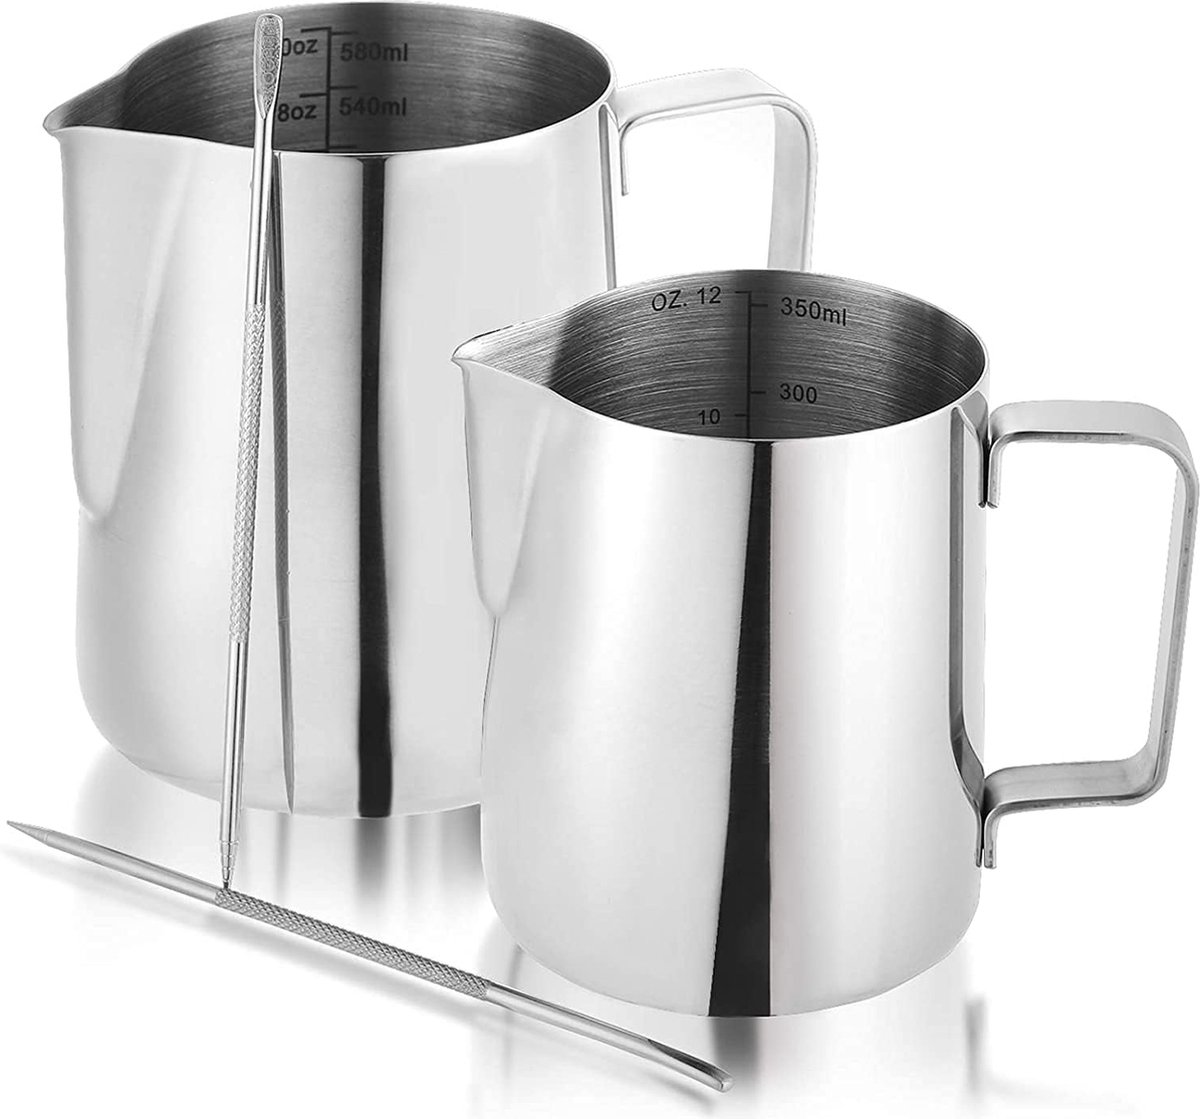 Set of 2 350 & 600 ml Milk Jug Stainless Steel Milk Pitcher Milk Frothing Jug Milk Frother Jug Cup with Measurement Markings and Latte Art Pen for Barista Cappuccino Espresso